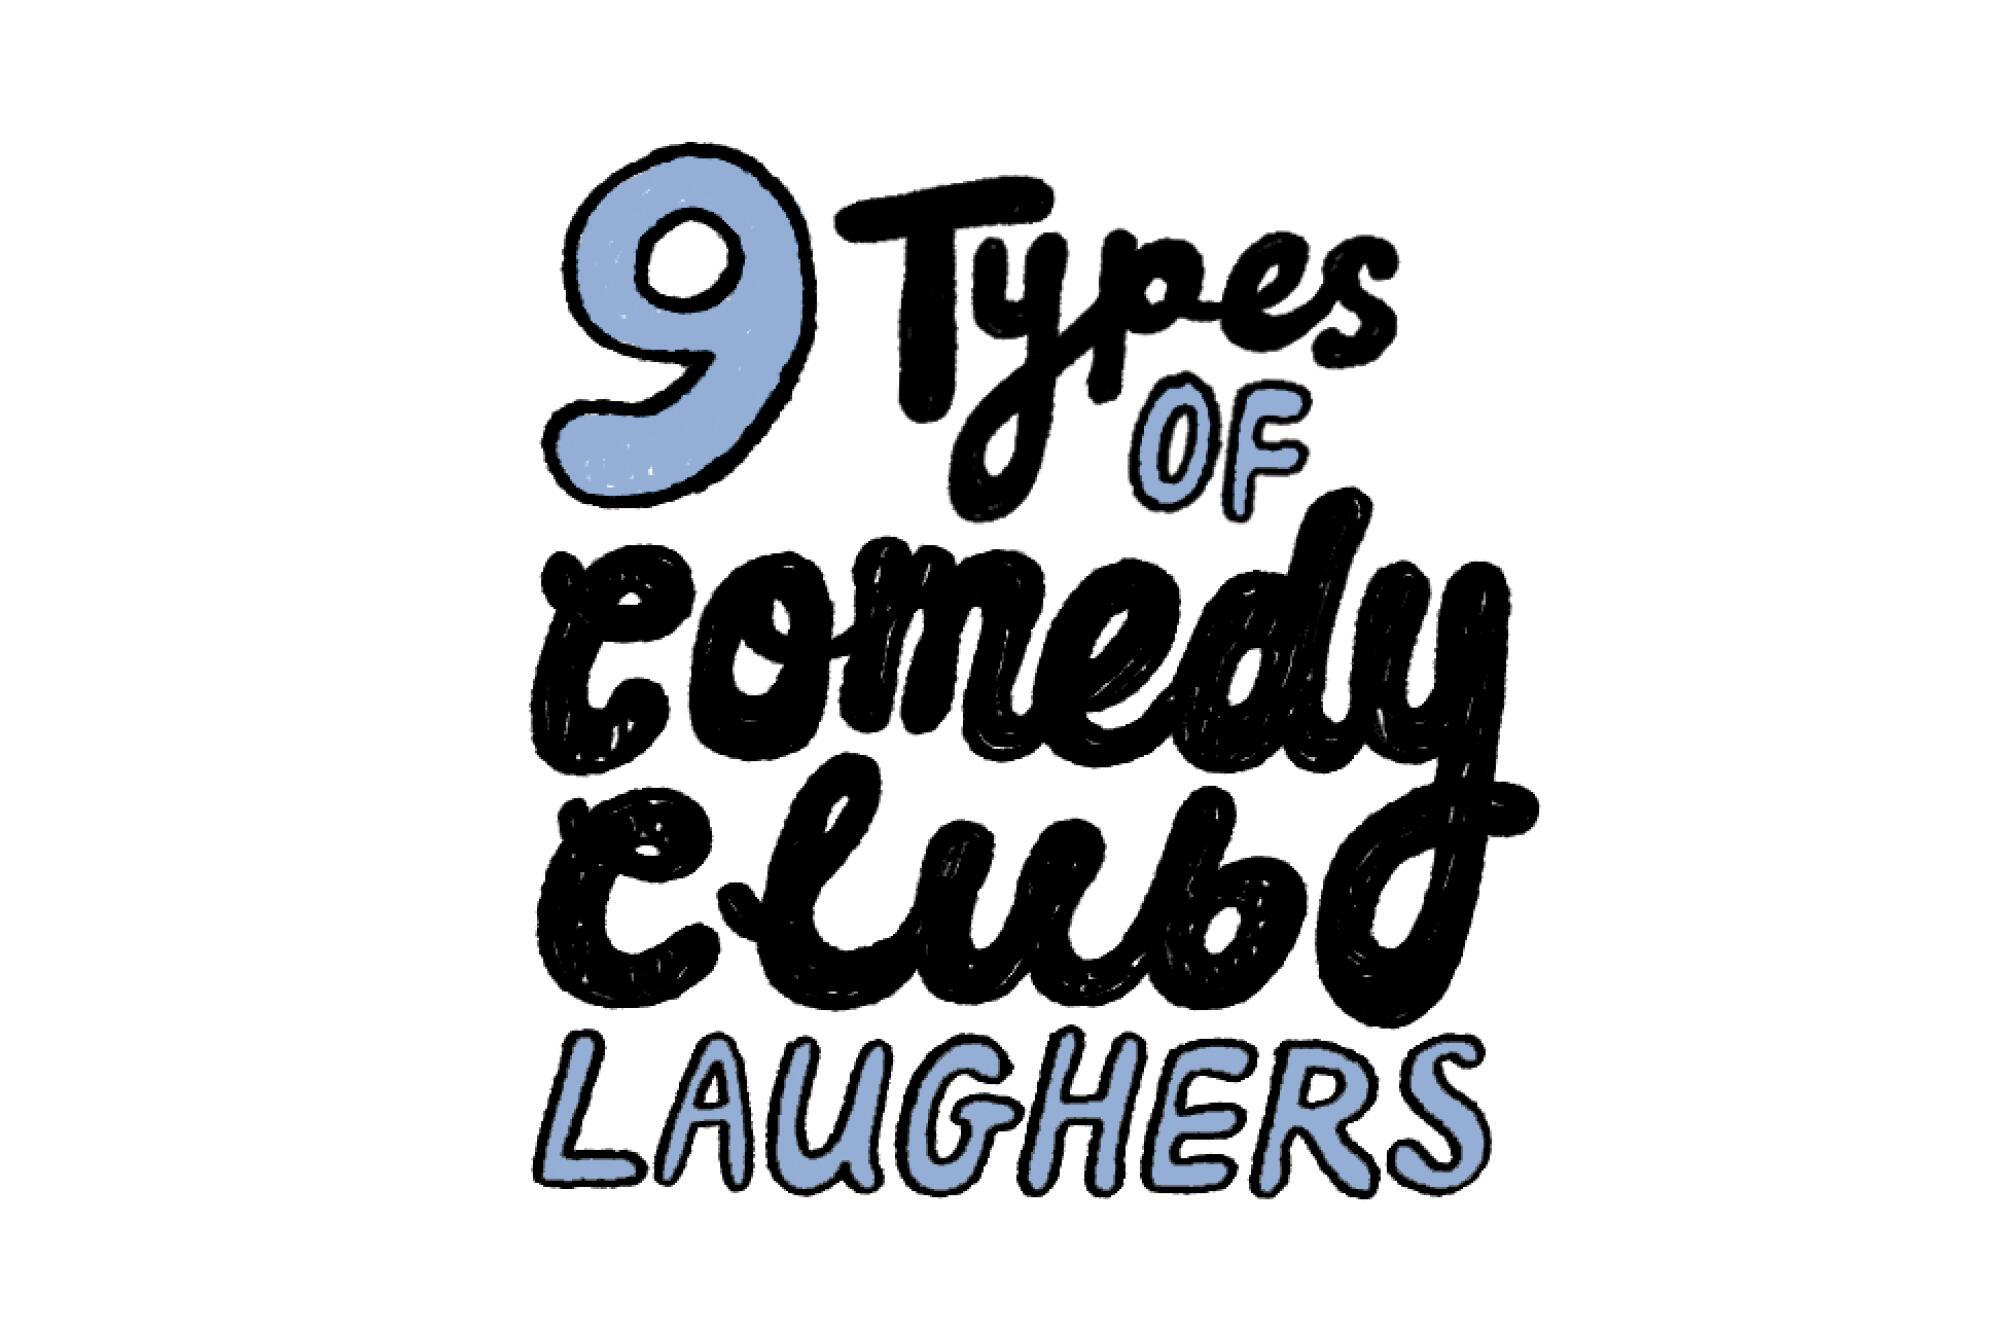 Illustrated text reading "9 Types of Comedy Club Laughers"